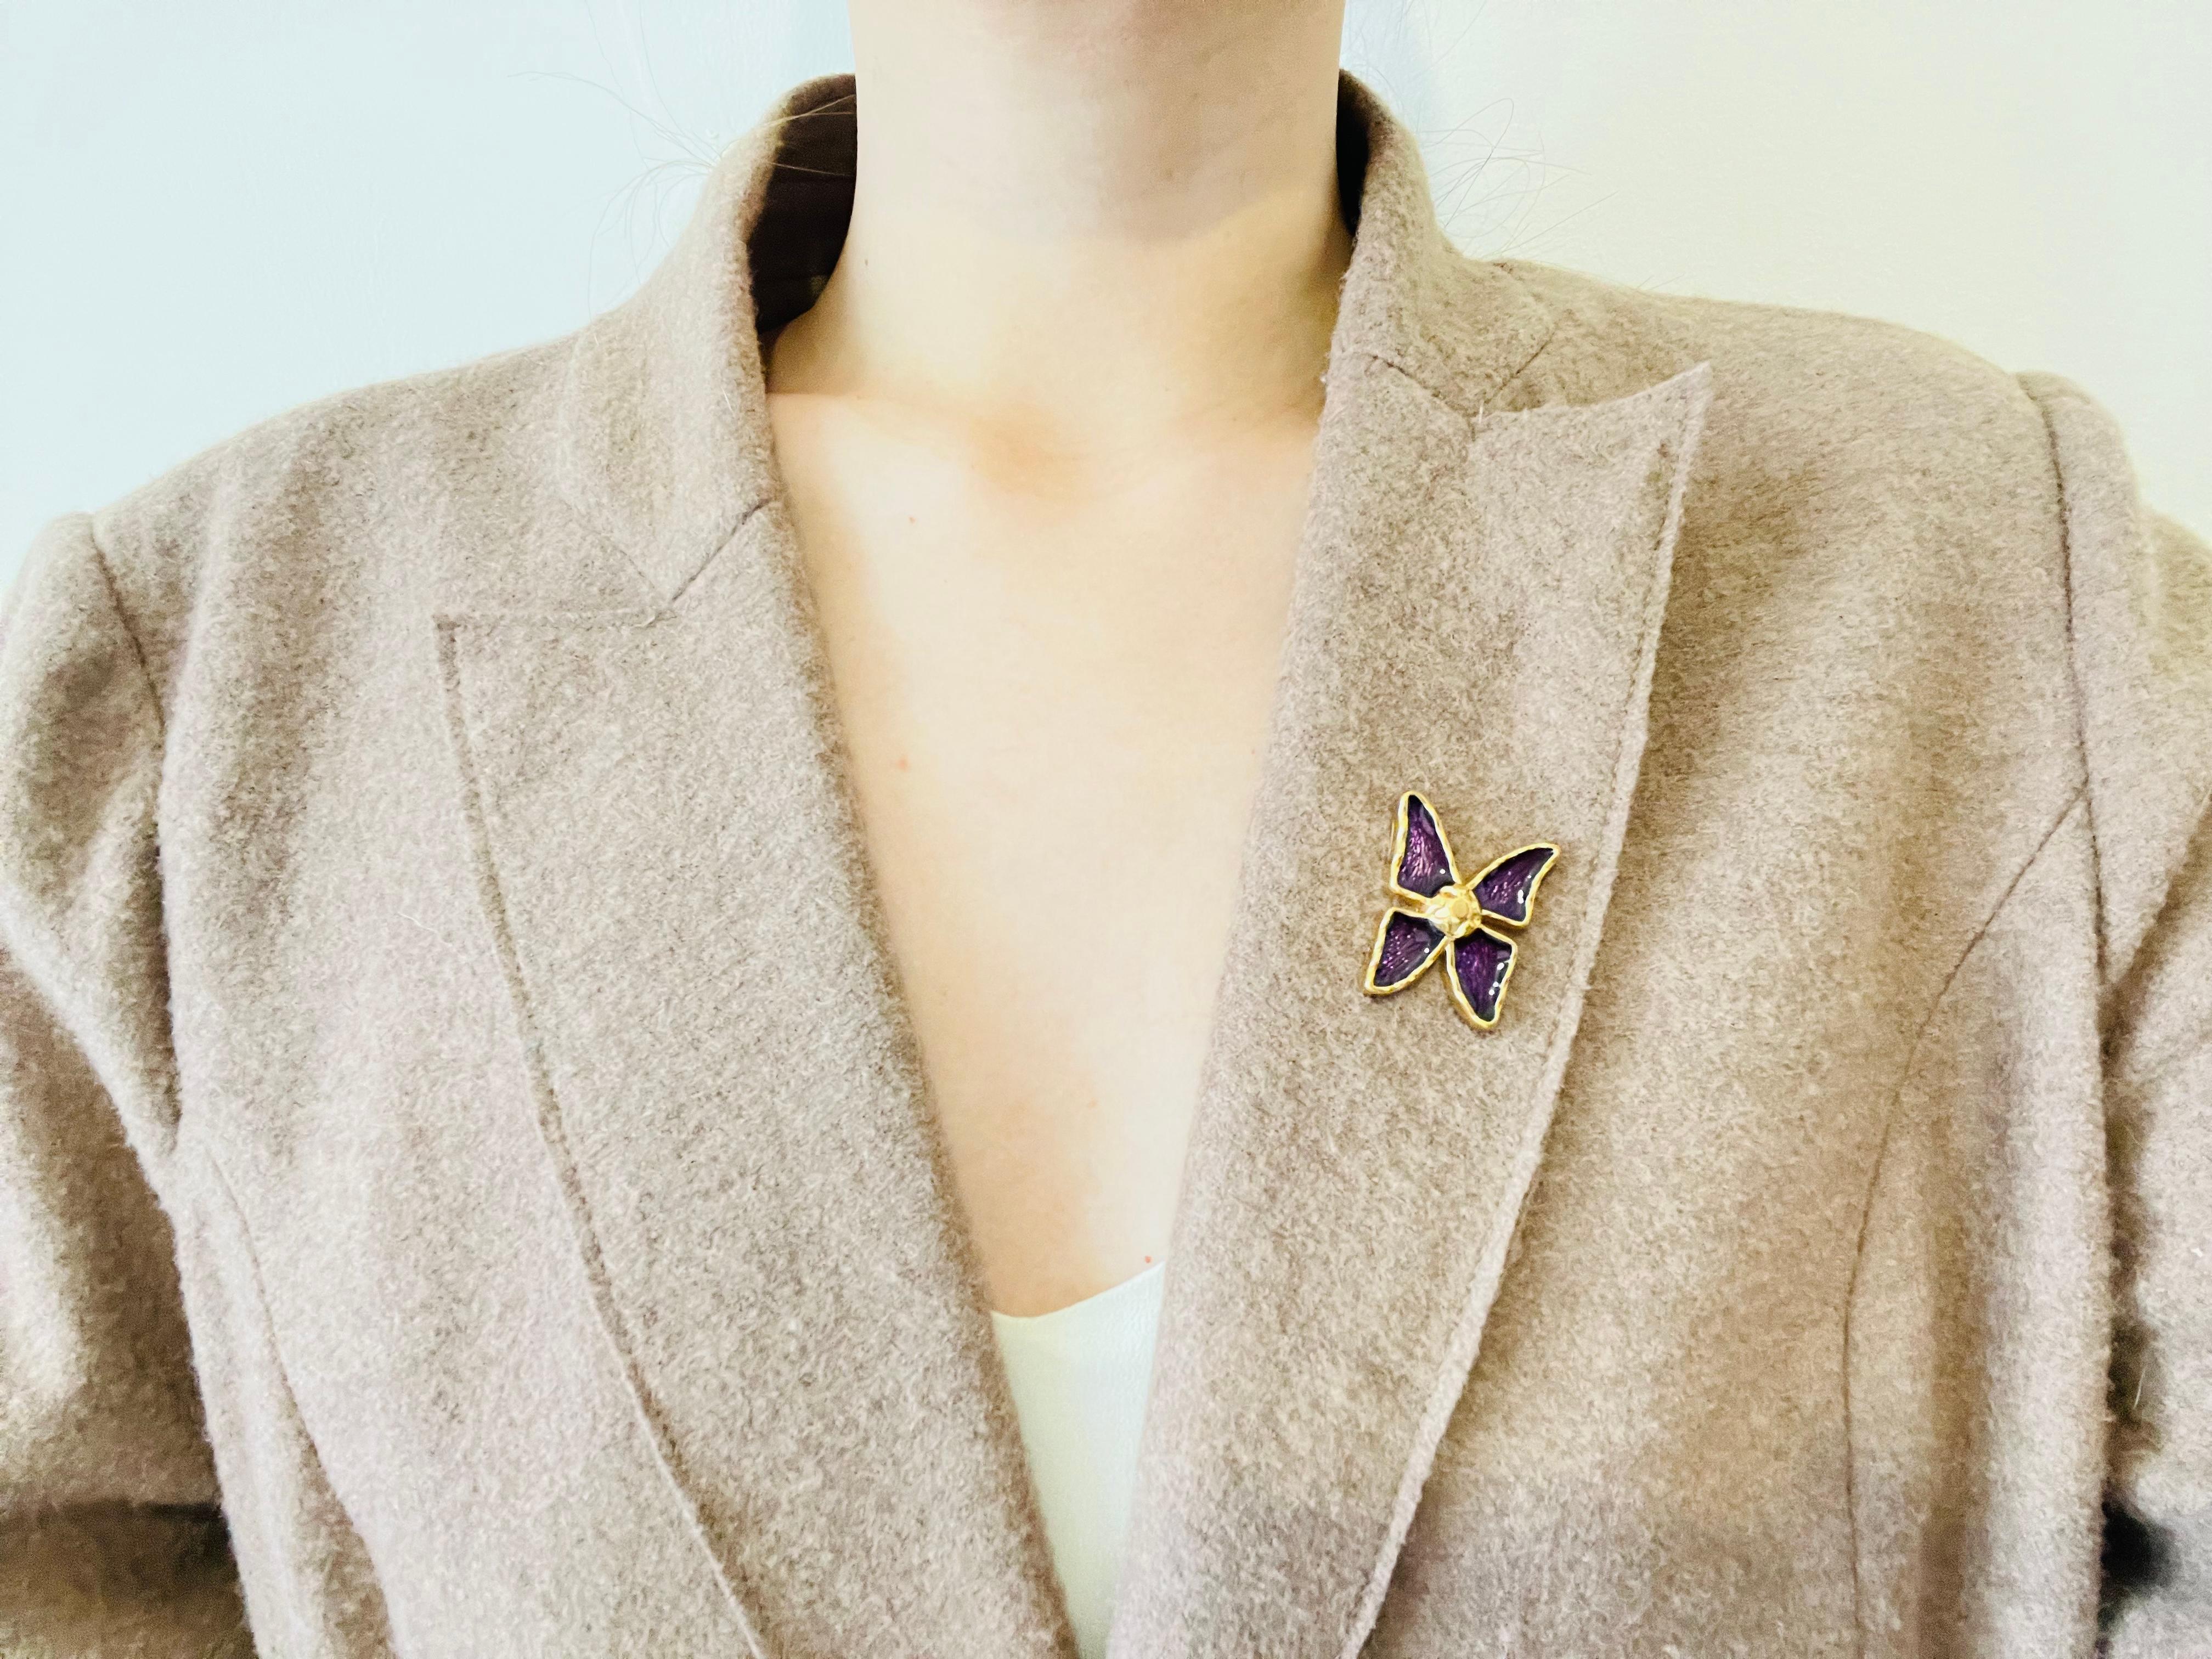 Yves Saint Laurent YSL Vintage 1980 Vivid Butterfly Glow Purple Gold Brooch Pin For Sale 1